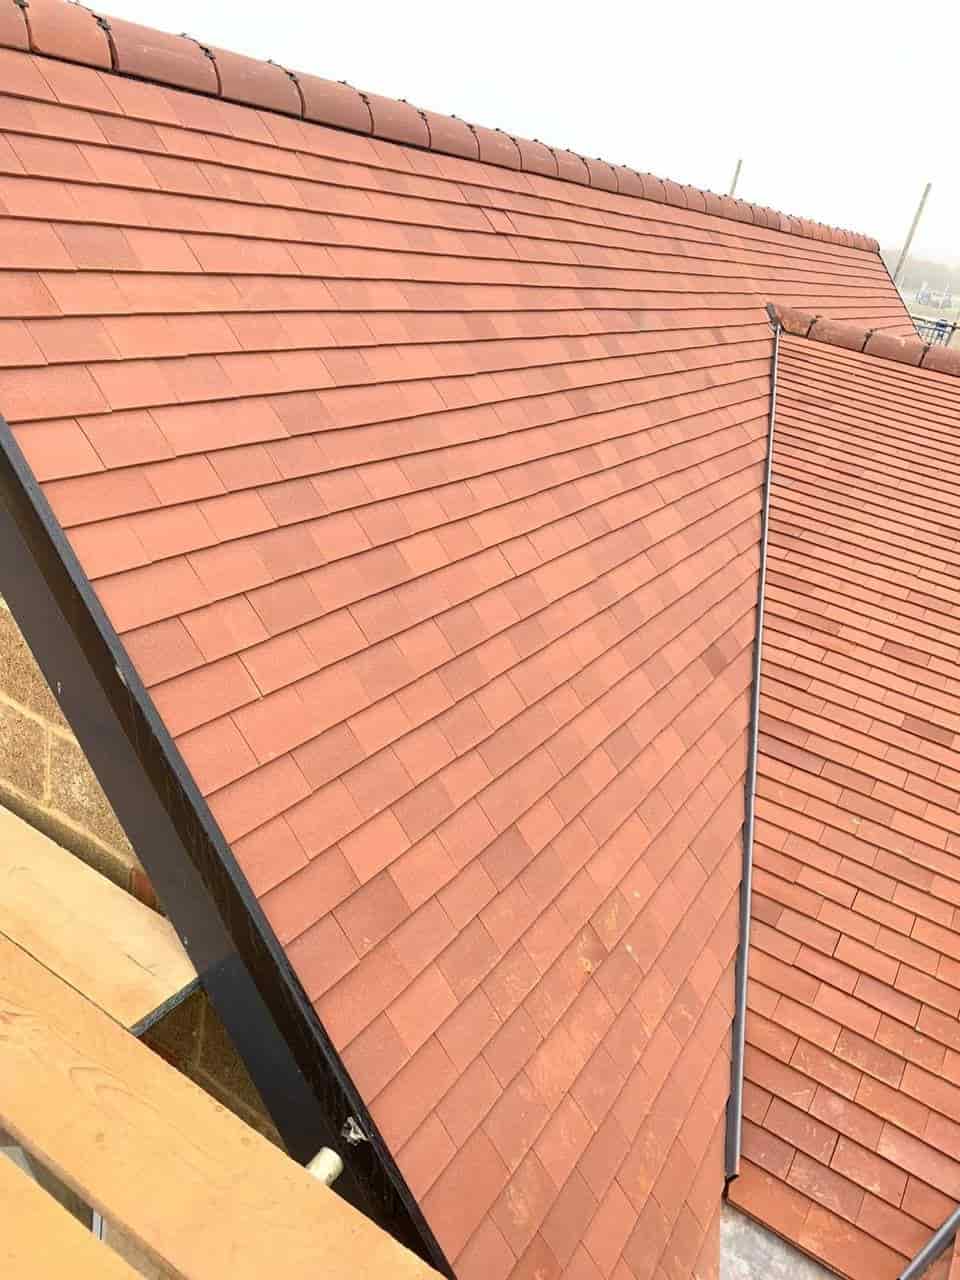 This is a photo of a new build roof in Tunbridge Wells. Installed by